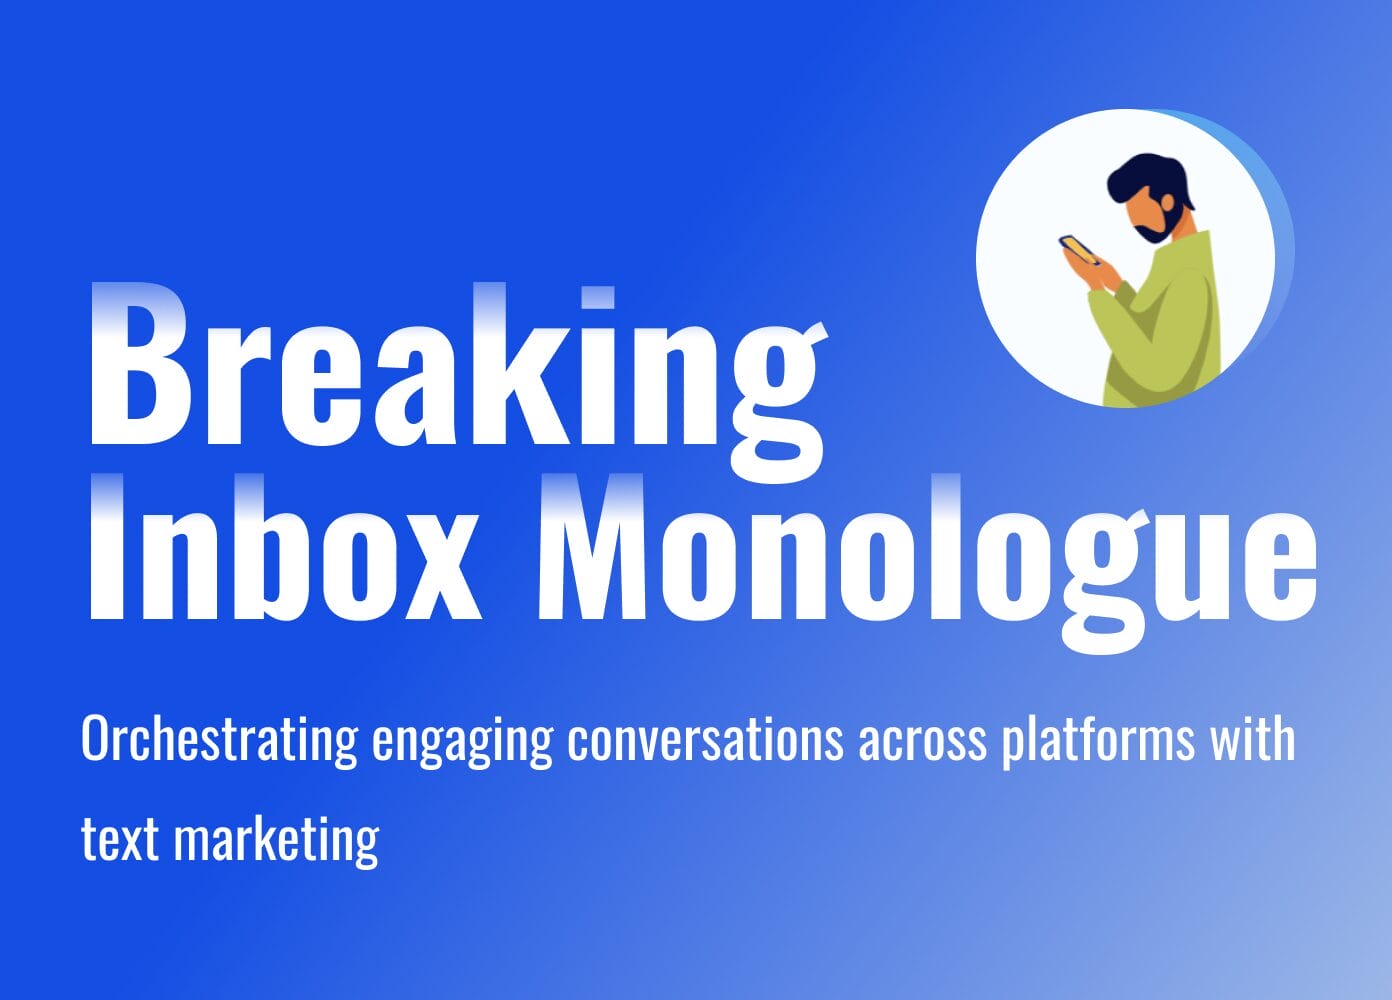 Break Inbox Monologue: Orchestrating Engaging Conversations Across Platforms With Text Marketing